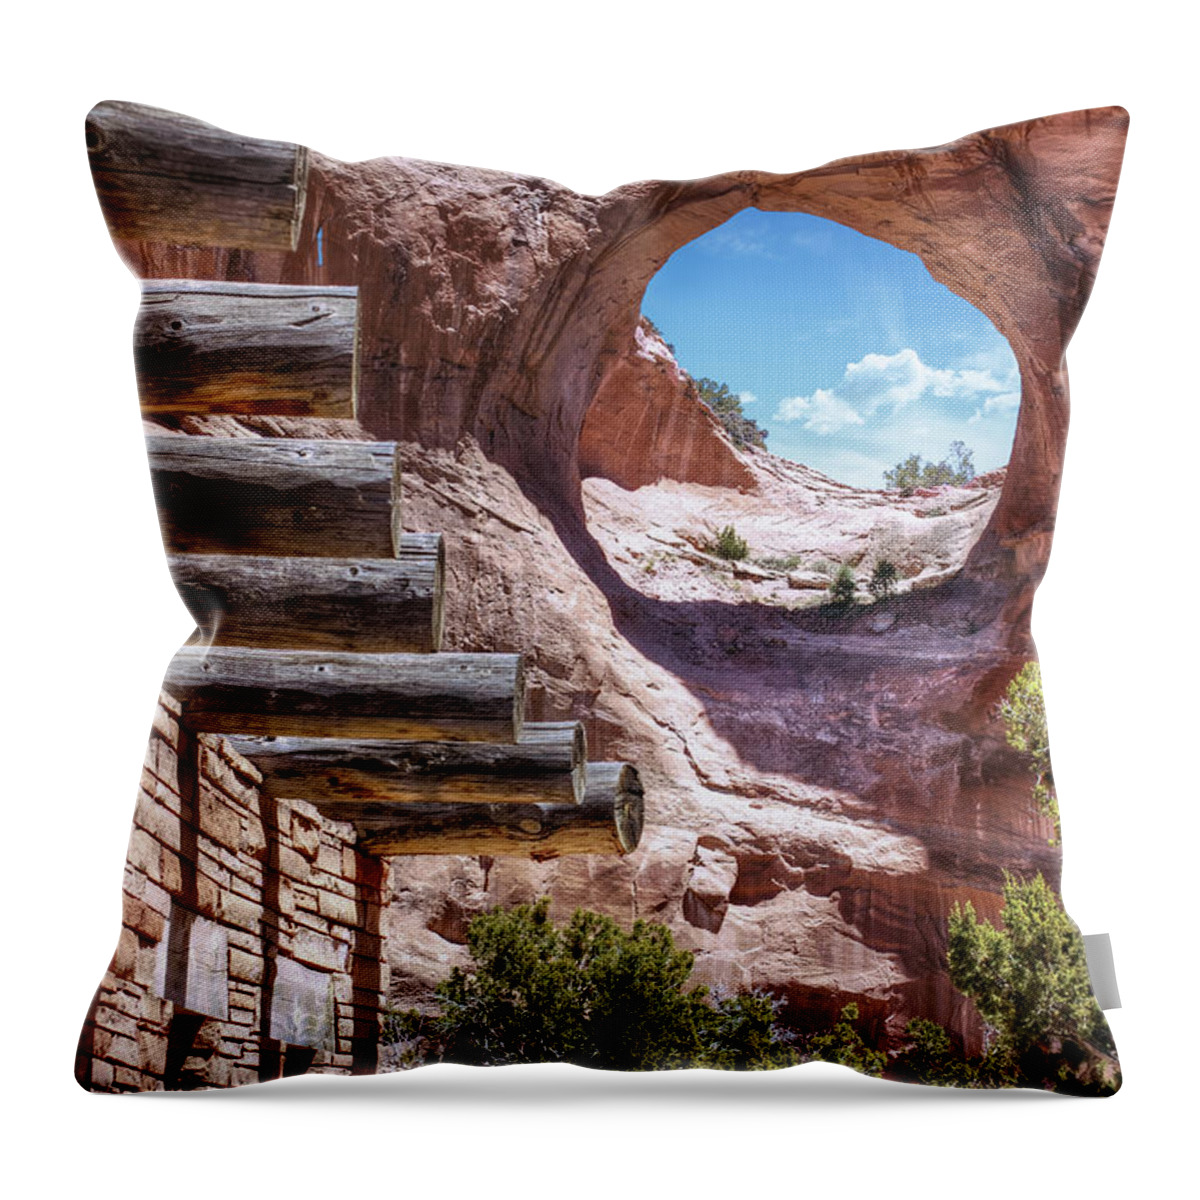 America Throw Pillow featuring the photograph Window Rock - Arizona - Navajo Nation Capitol by Gregory Ballos